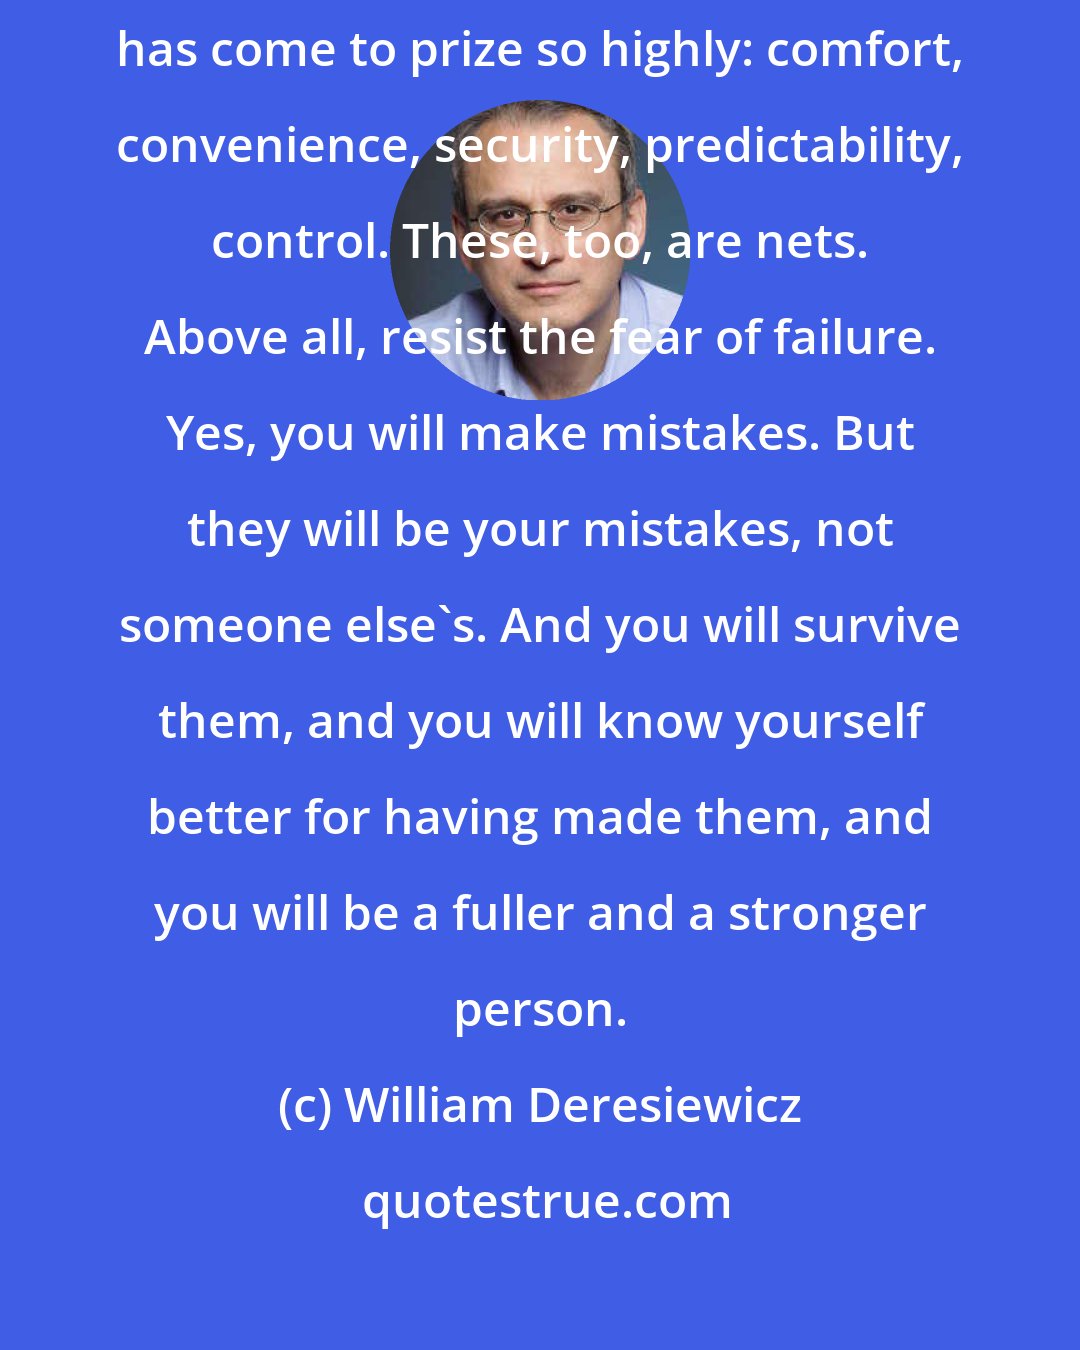 William Deresiewicz: Don't play it safe. Resist the seductions of the cowardly values our society has come to prize so highly: comfort, convenience, security, predictability, control. These, too, are nets. Above all, resist the fear of failure. Yes, you will make mistakes. But they will be your mistakes, not someone else's. And you will survive them, and you will know yourself better for having made them, and you will be a fuller and a stronger person.